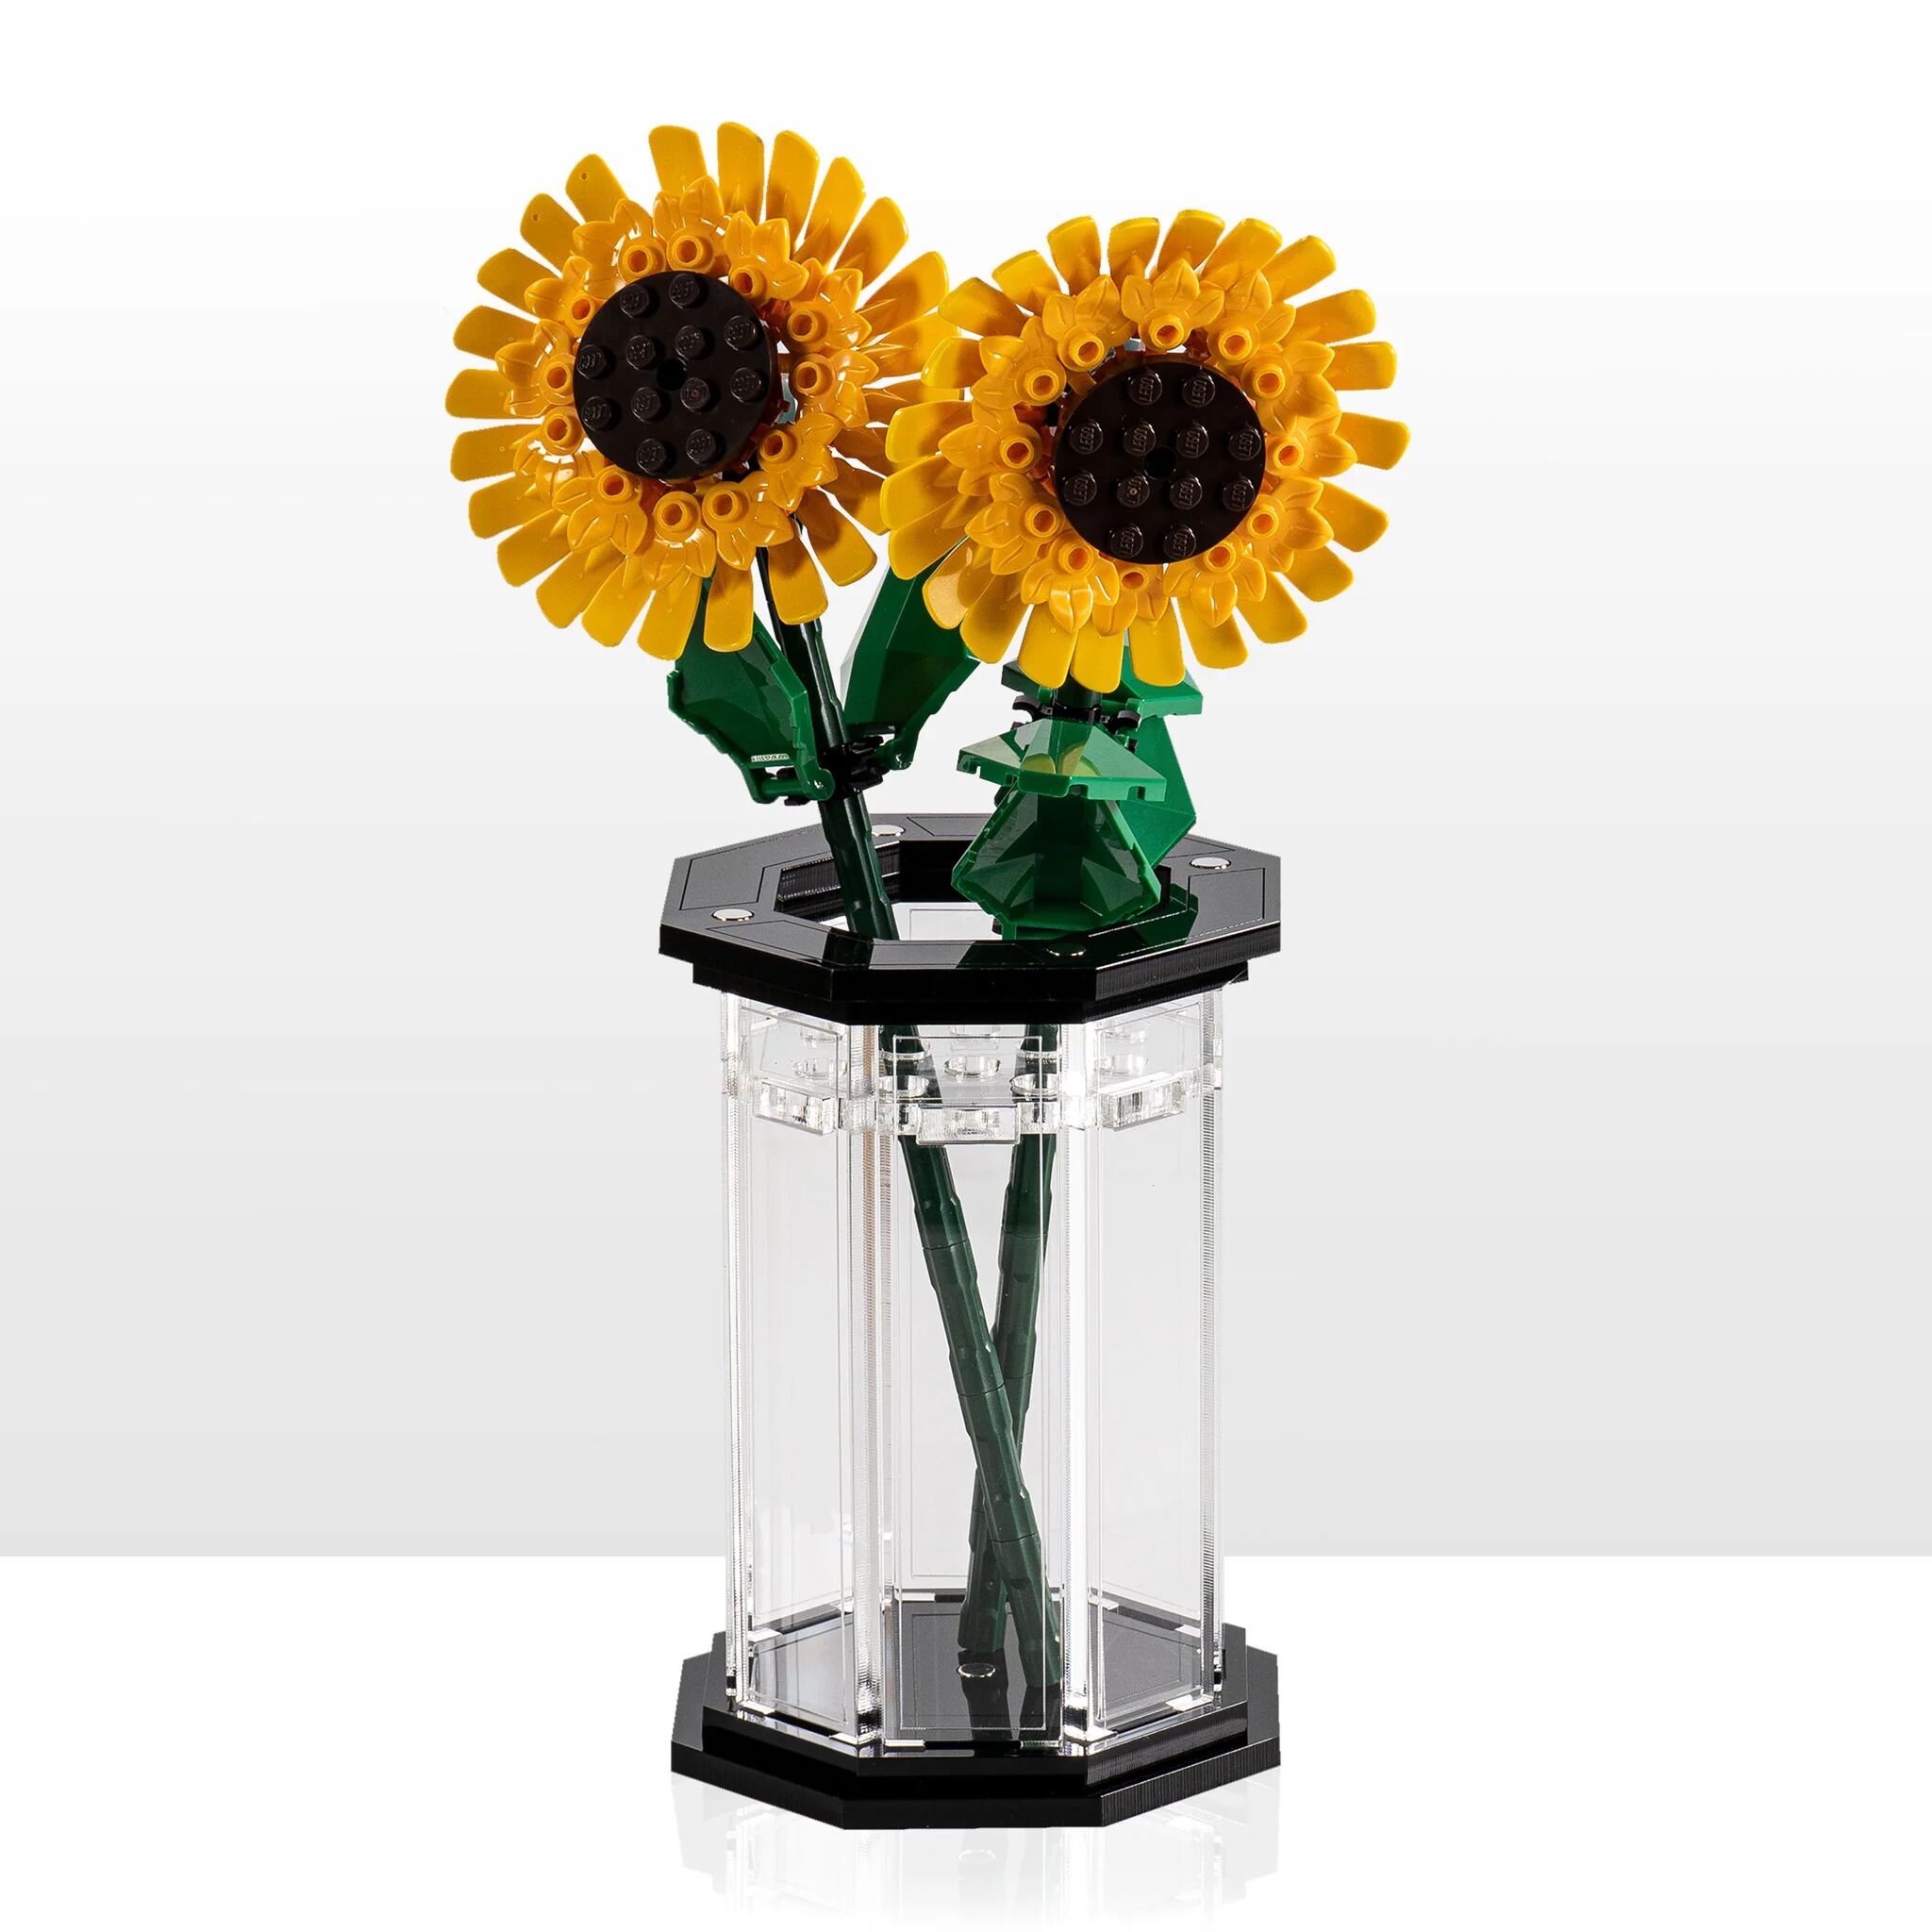 Wicked Brick Large Display Vase for LEGO® Flowers - Black - 1 - Classic design